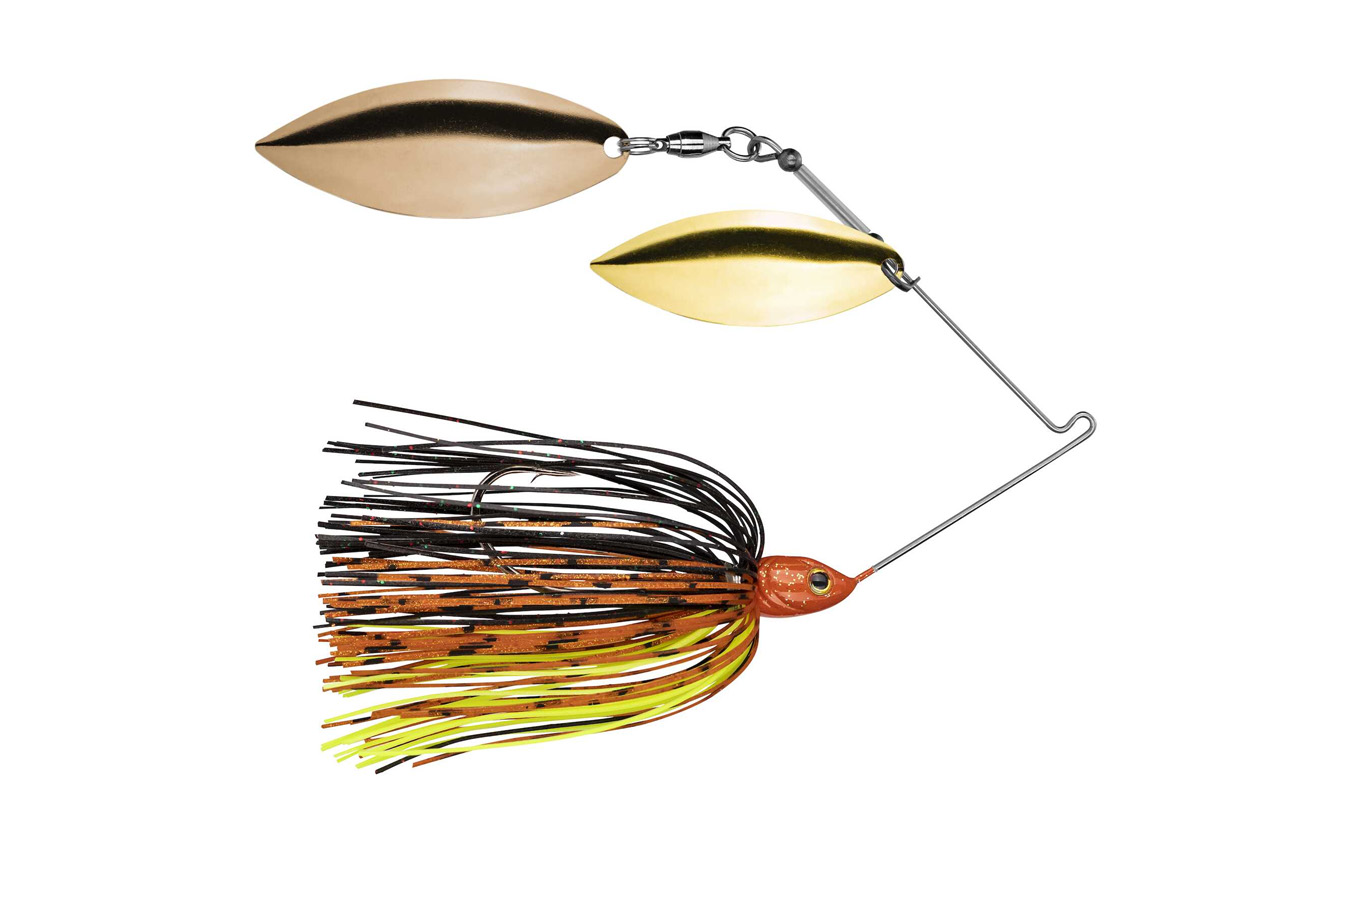  Tackle Max Buzz Feed 5.6, Buzz Bait, Spinner Bait